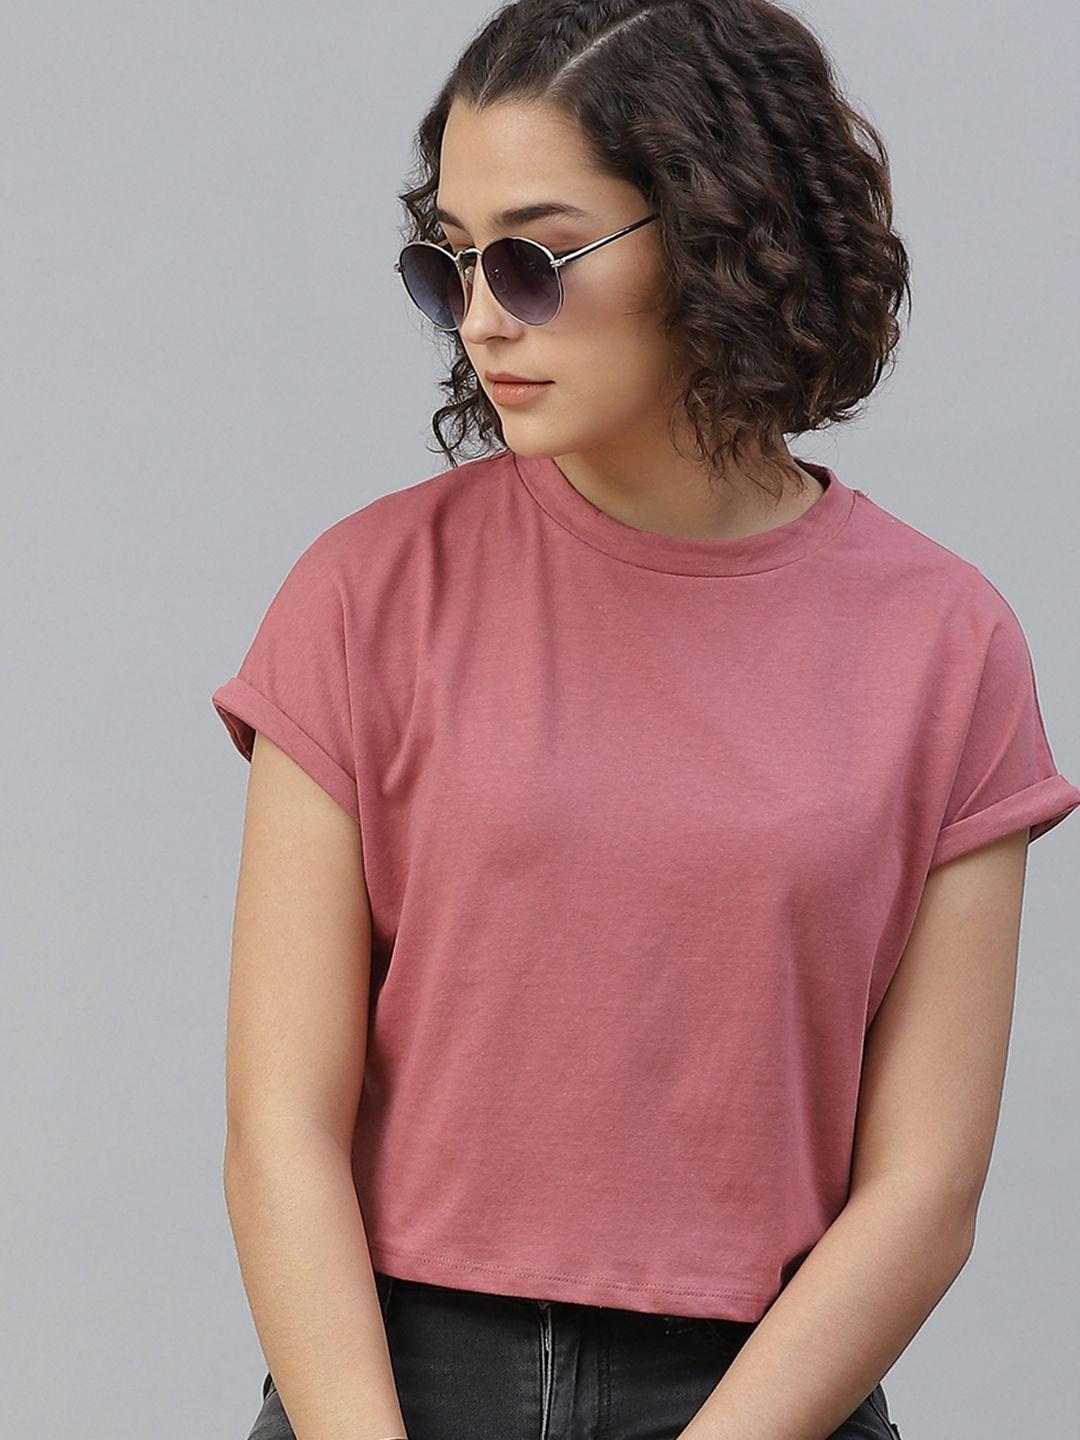 The Roadster Lifestyle Co Women Dusty Pink Cotton Solid Round Neck Cropped T-shirt